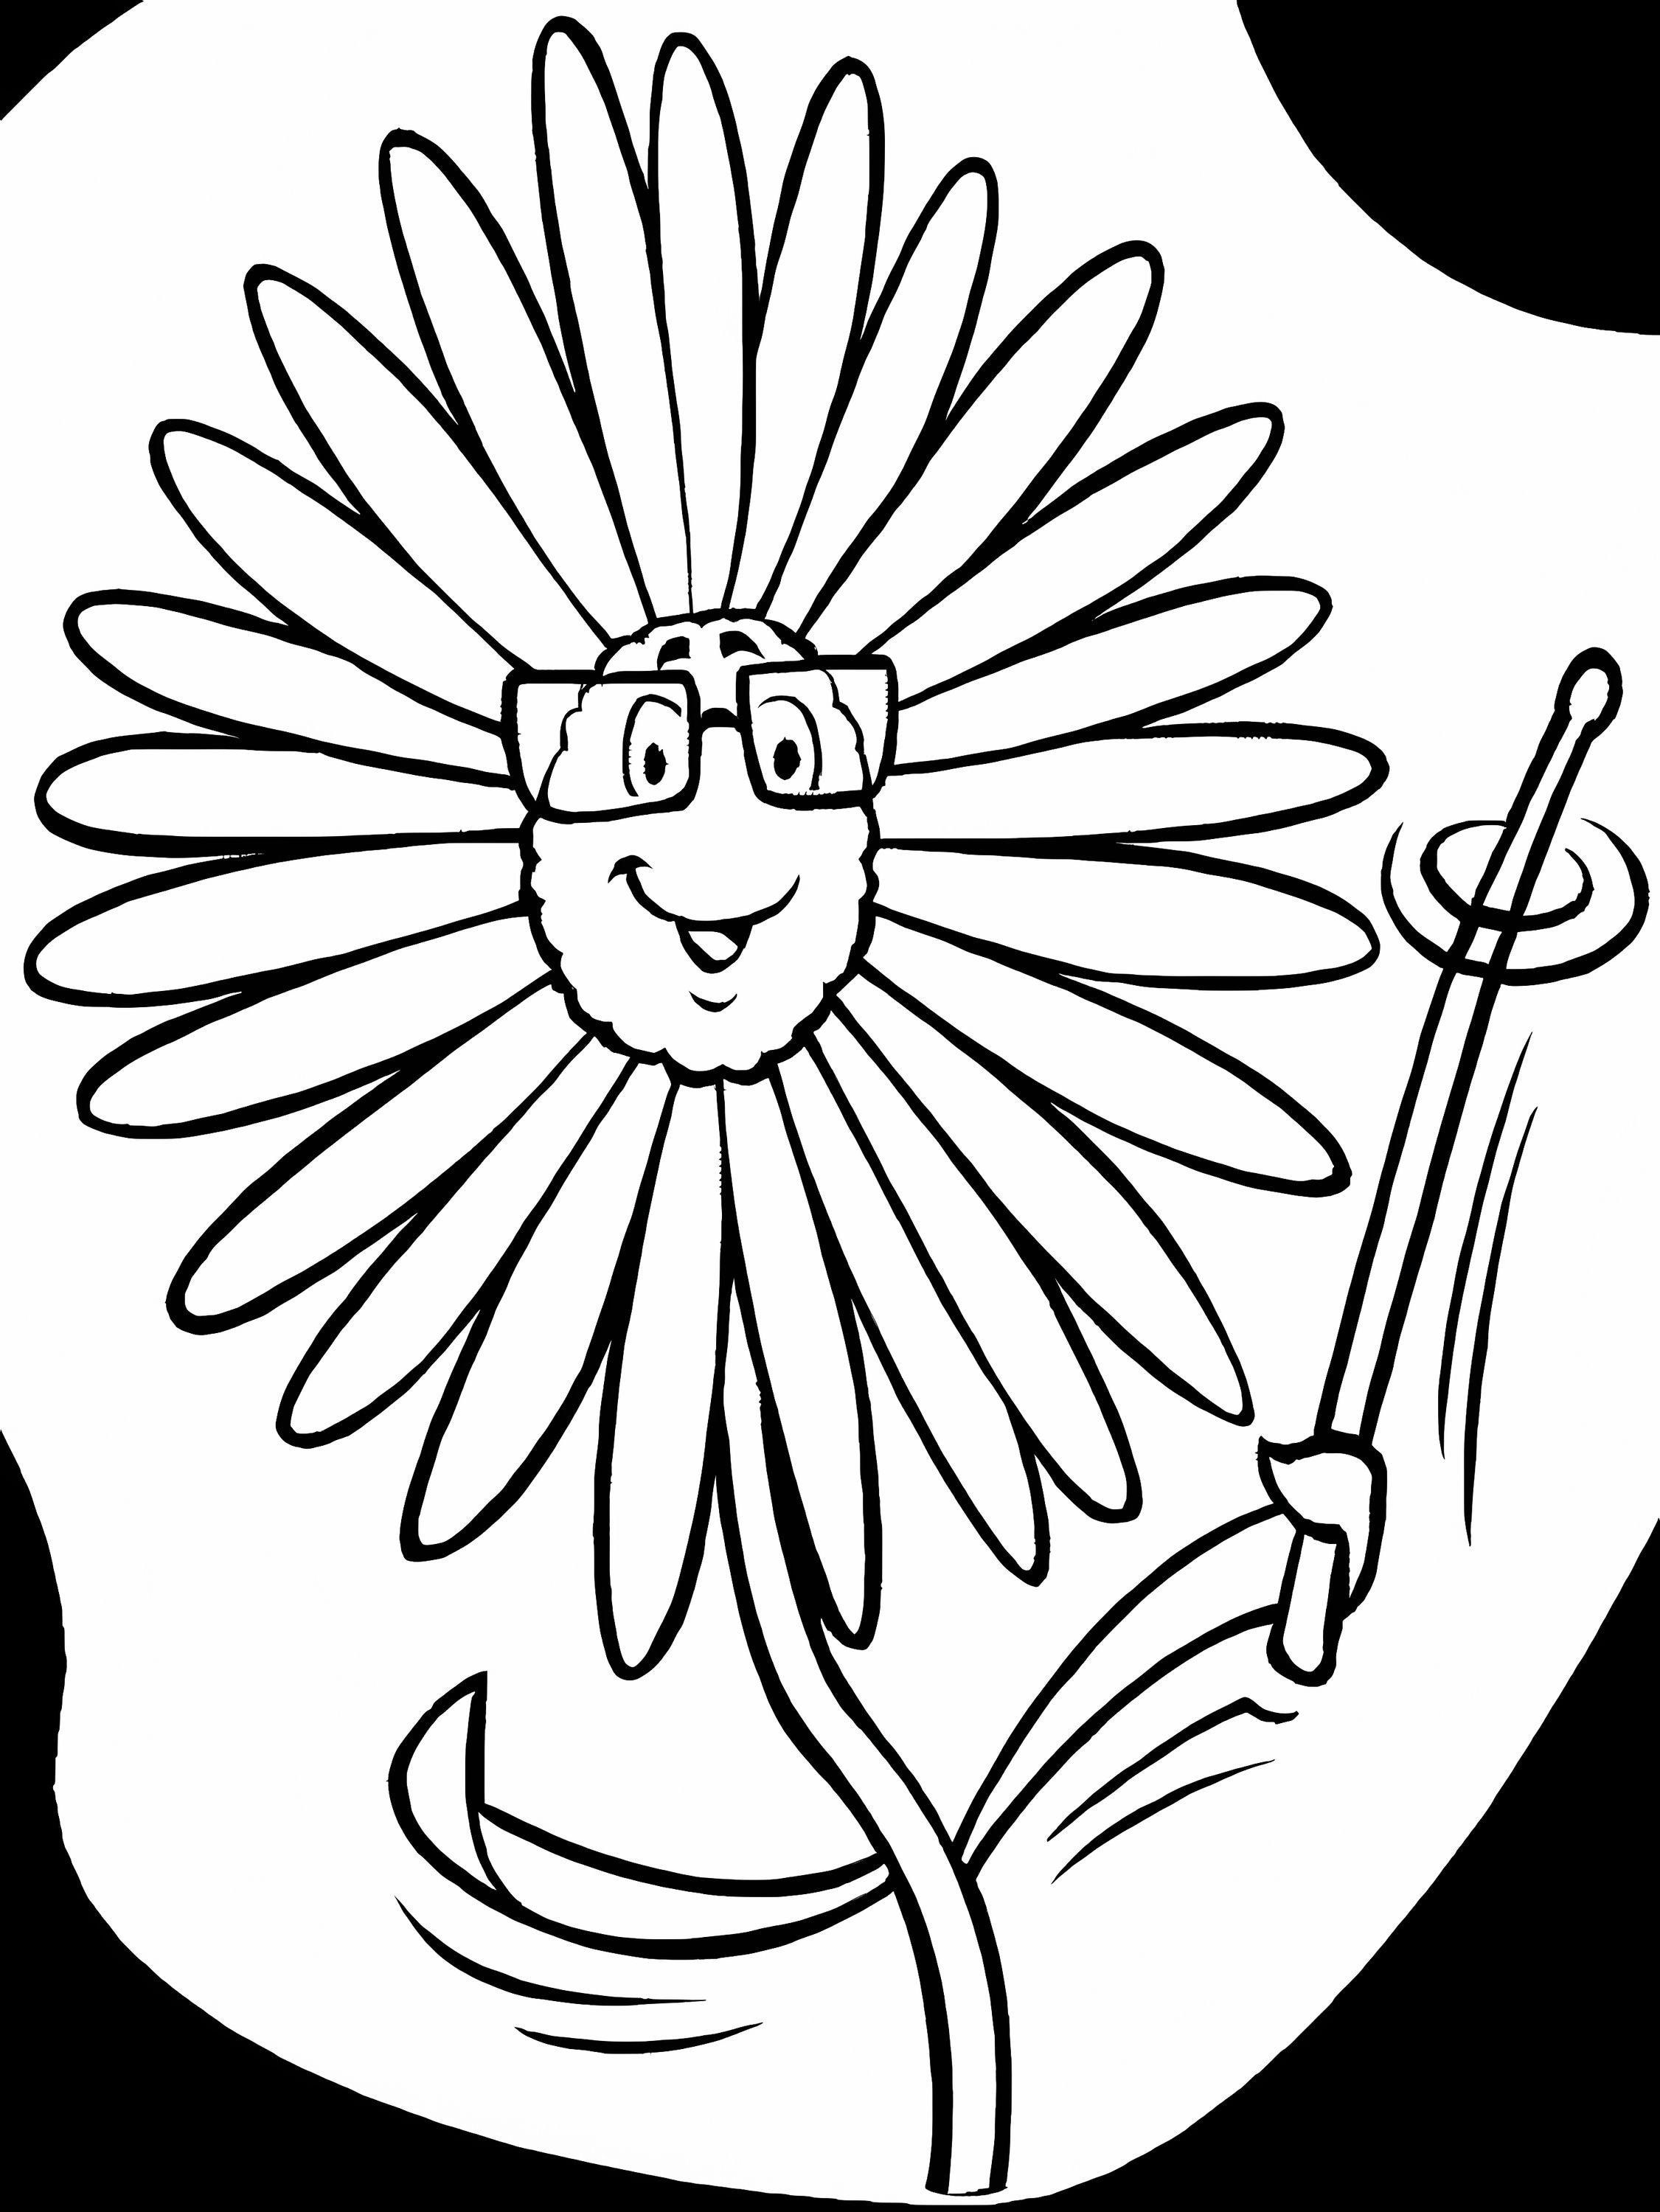 Cartoon Daisy With Glasses coloring page